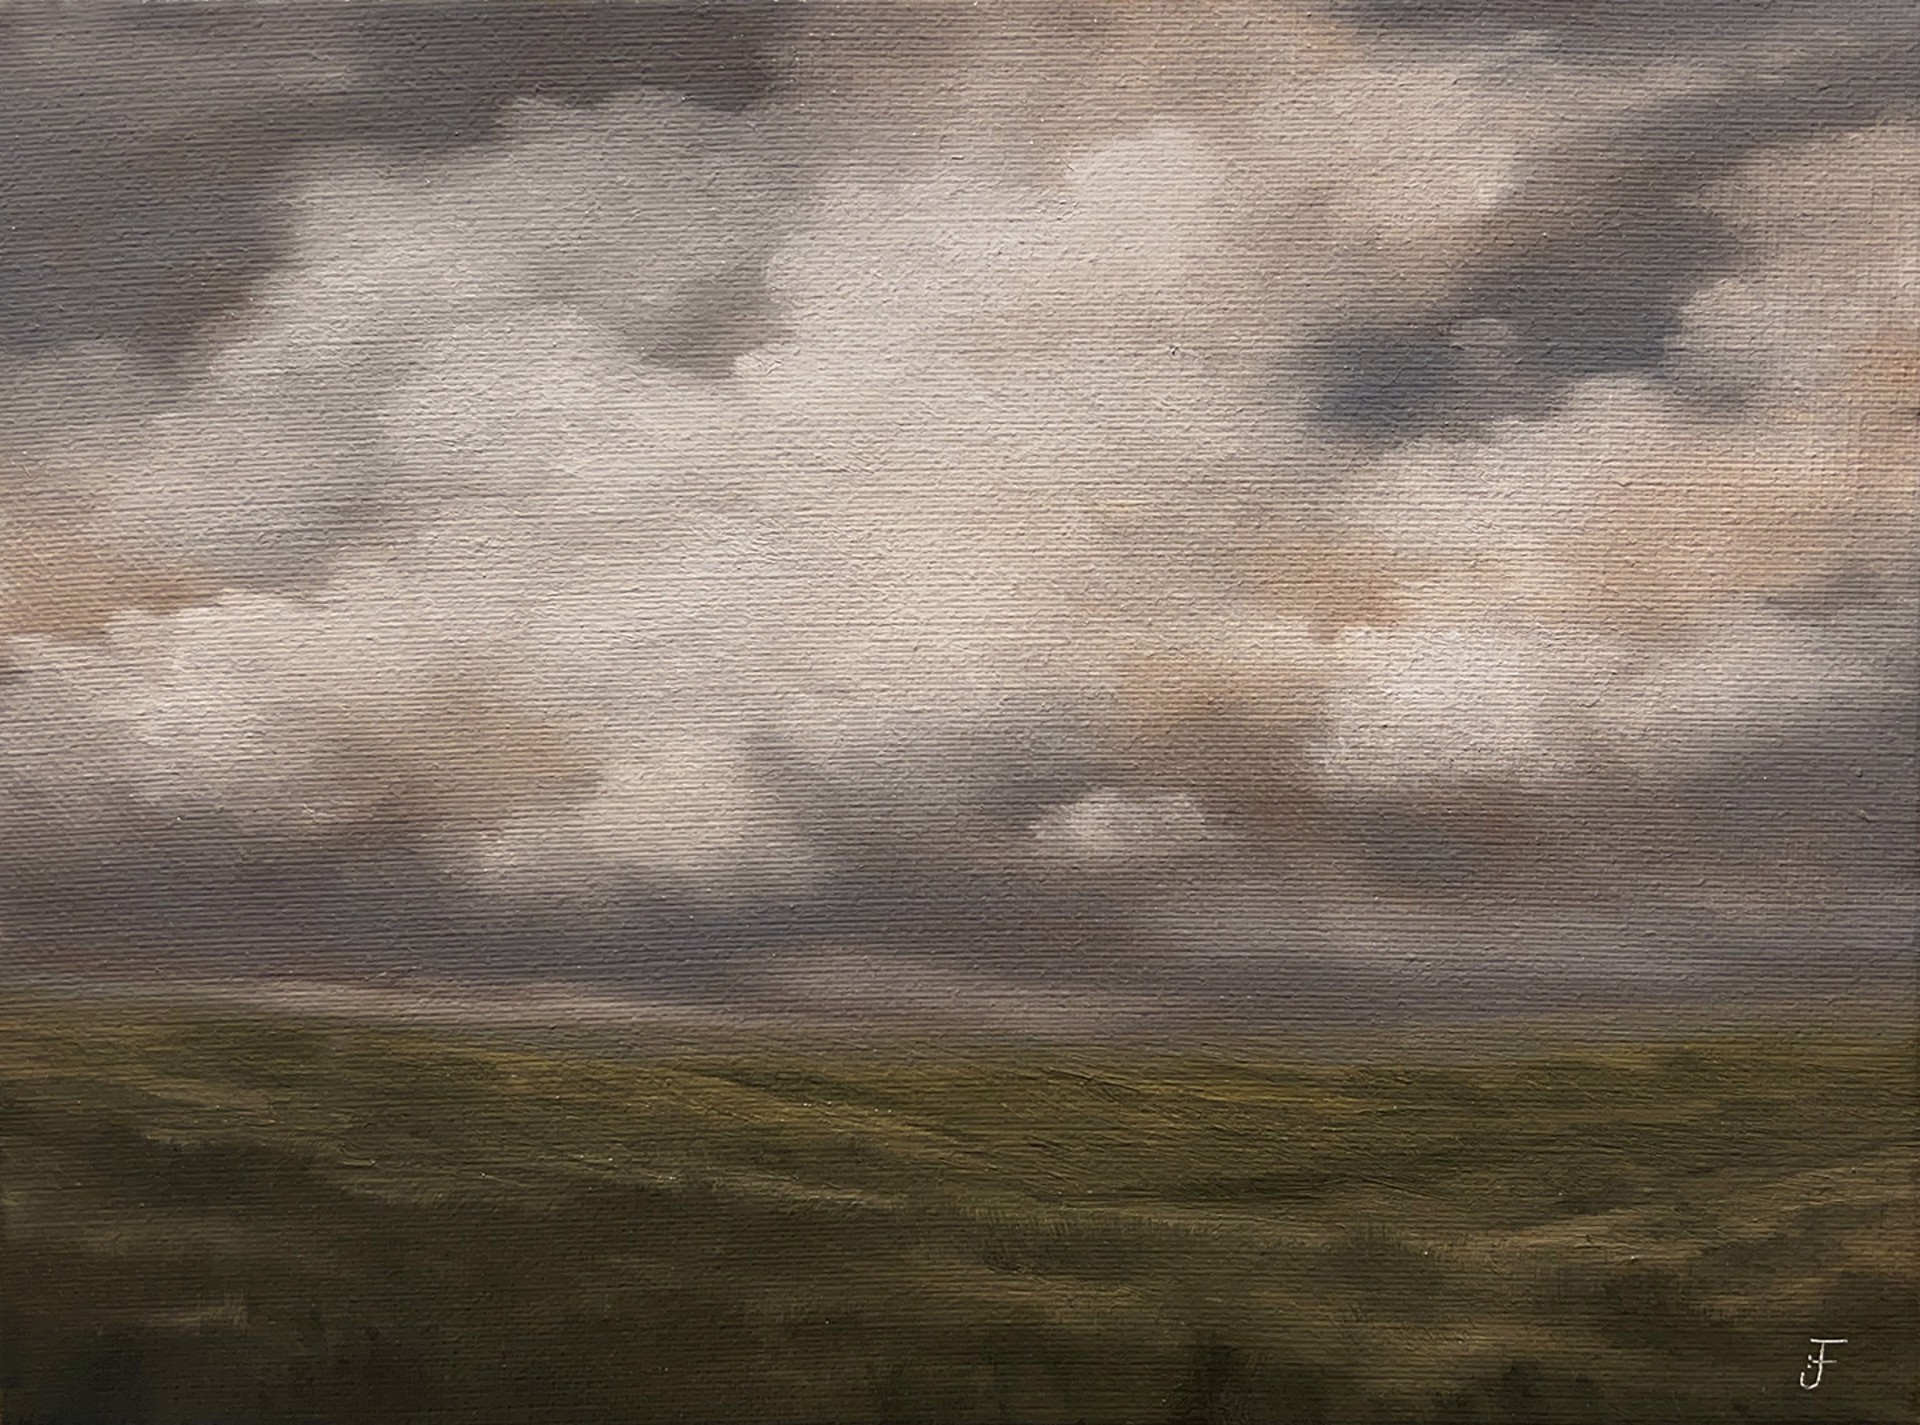 Hillside With Clouds by Heather Jacks